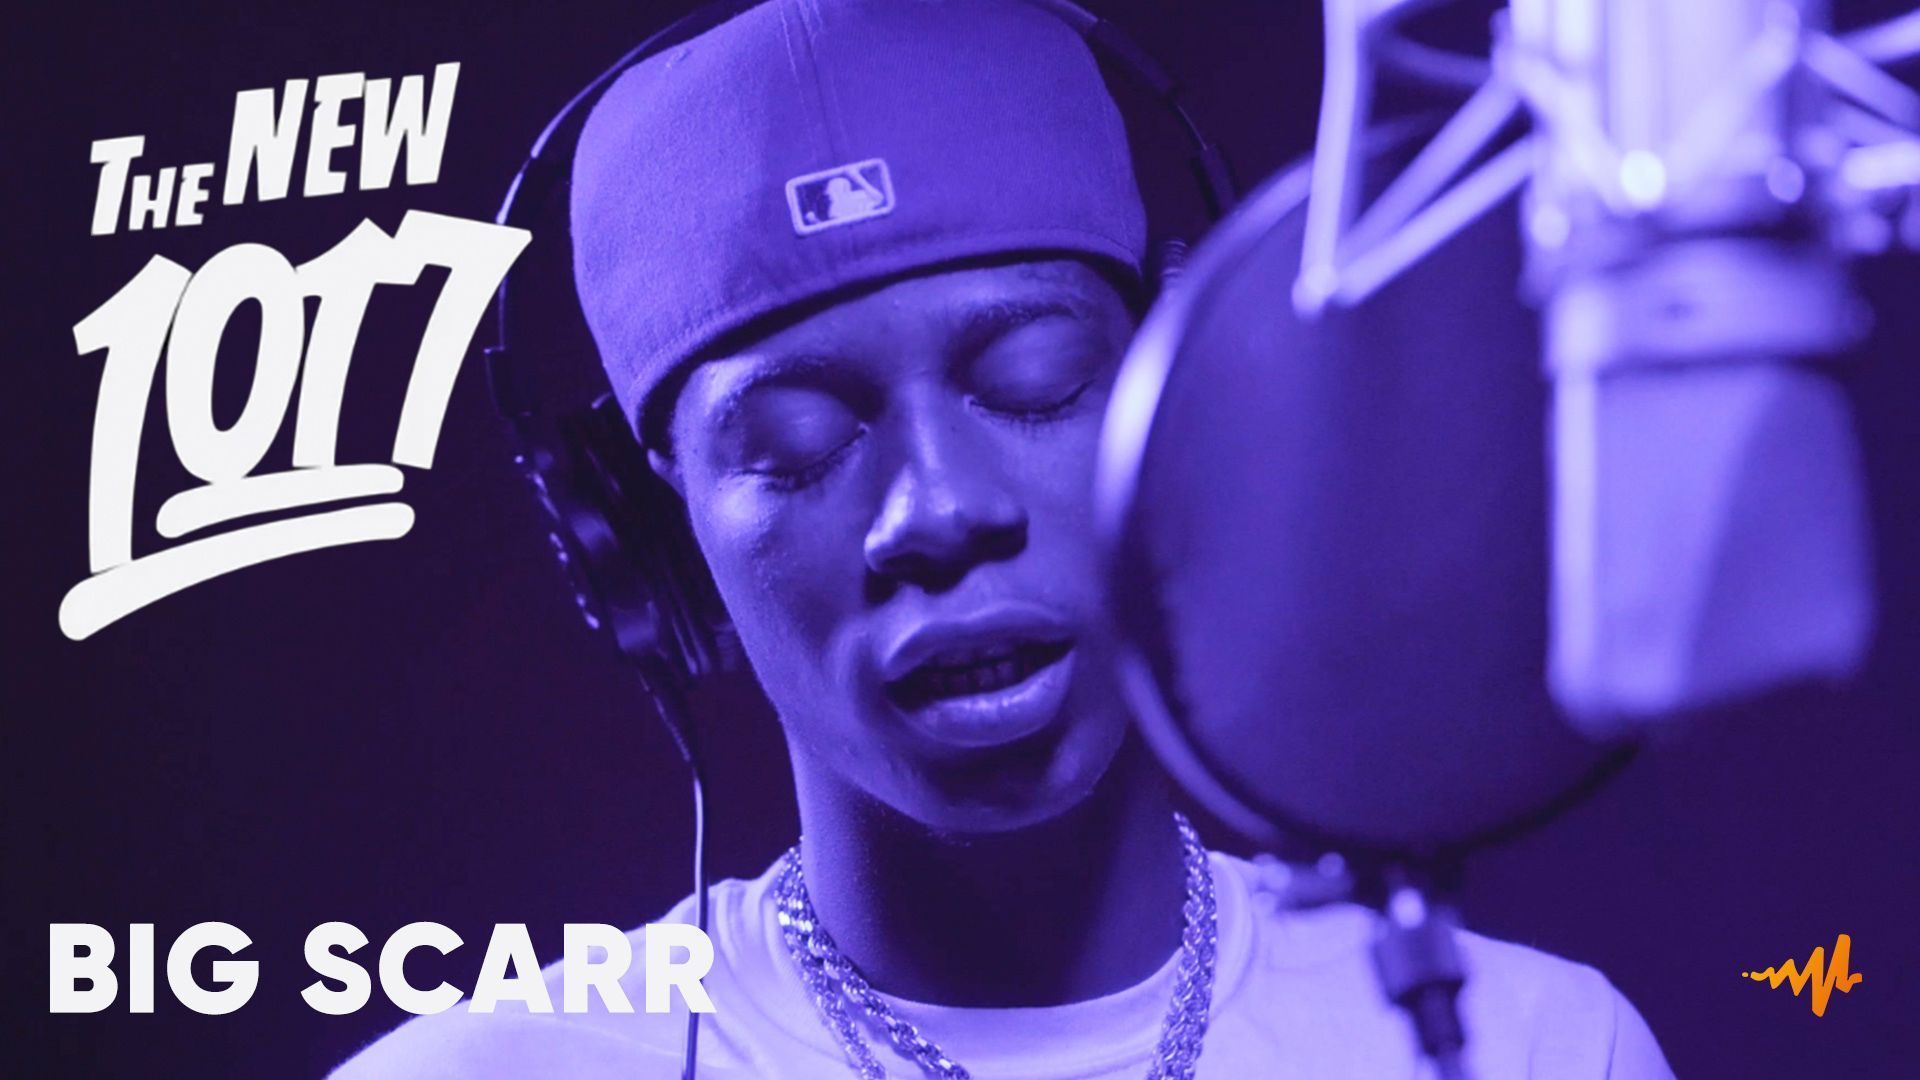 Big Scarr Covers Gucci Mane's Big Boy Diamonds with Audiomack for 1017 Freestyles